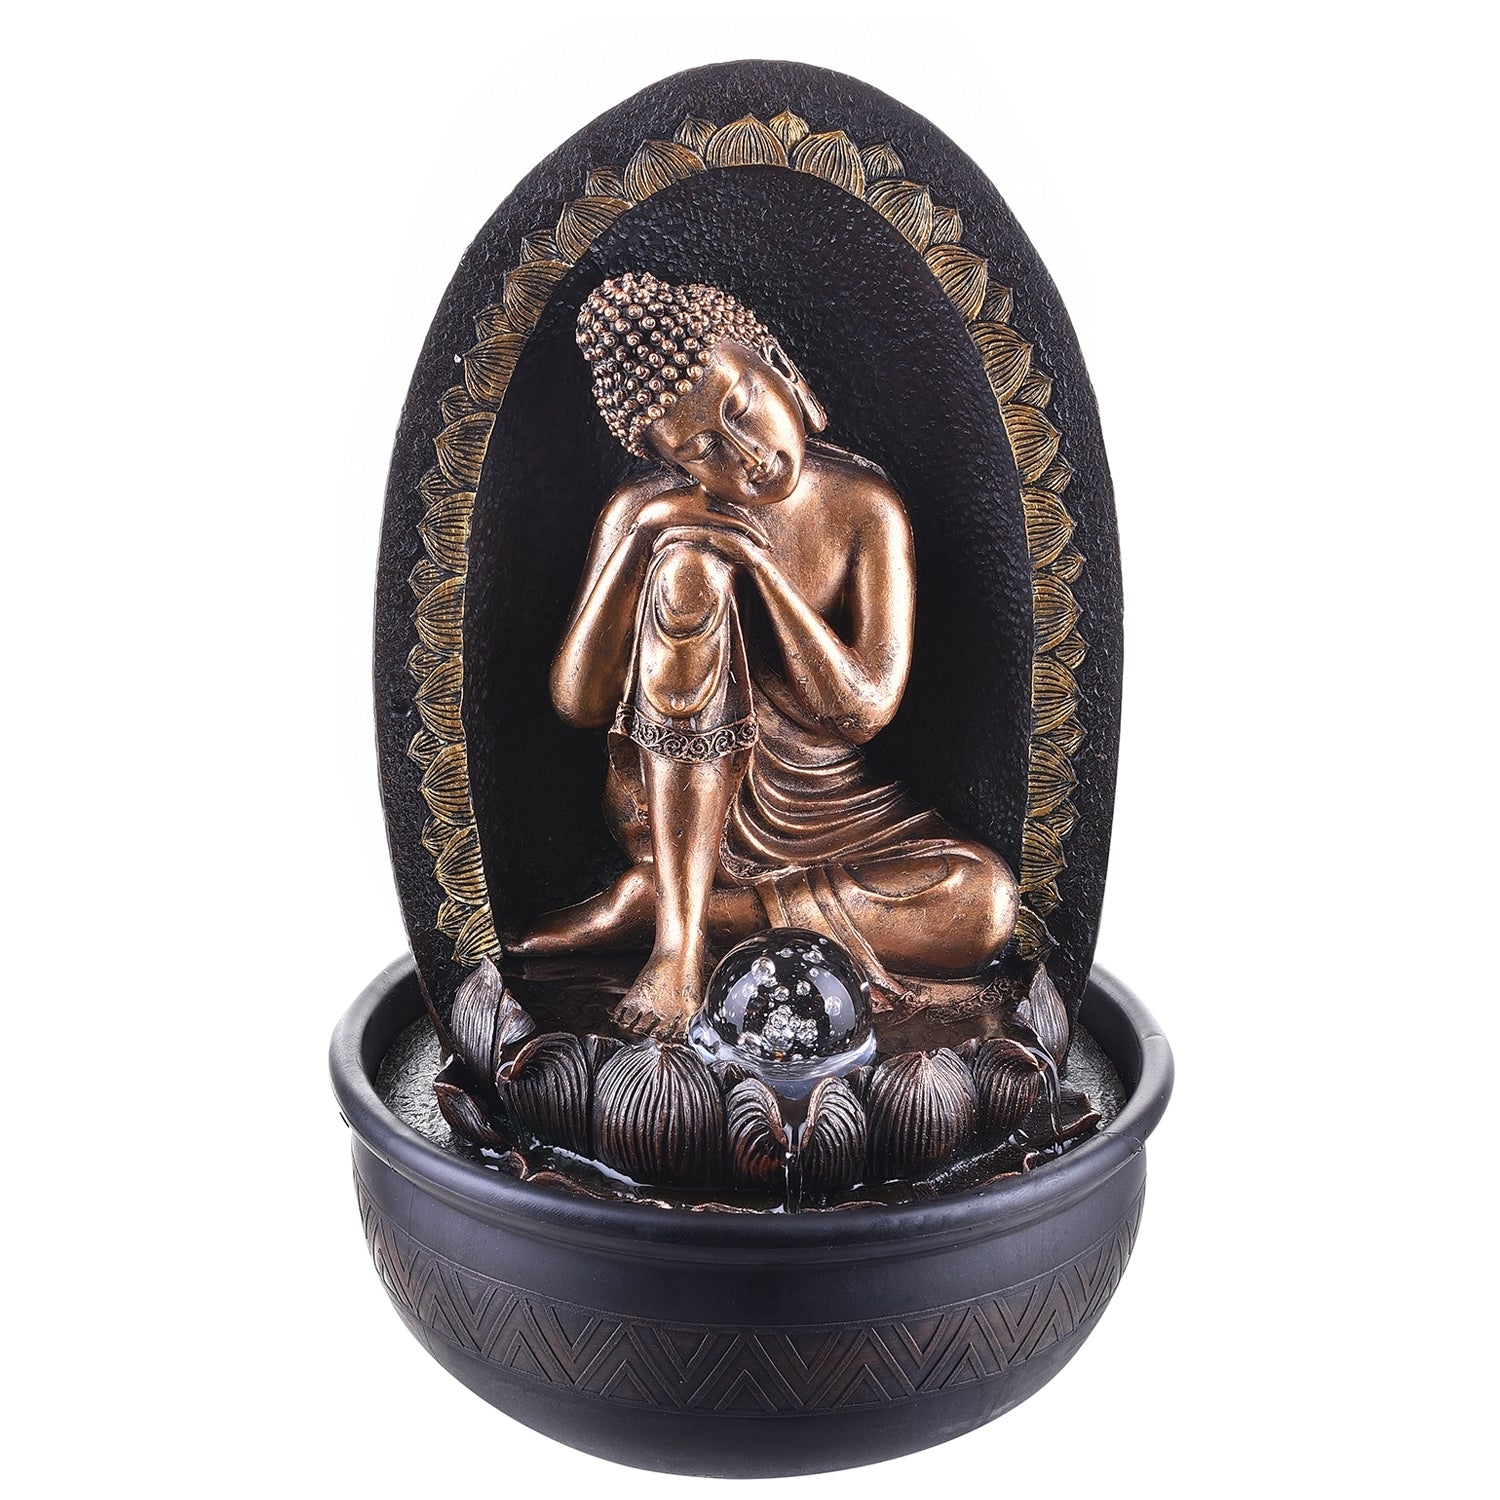 Polystone Brown and Golden Buddha On Knee Statue Water Fountain With Crystal Ball for Home/Office Decor 2